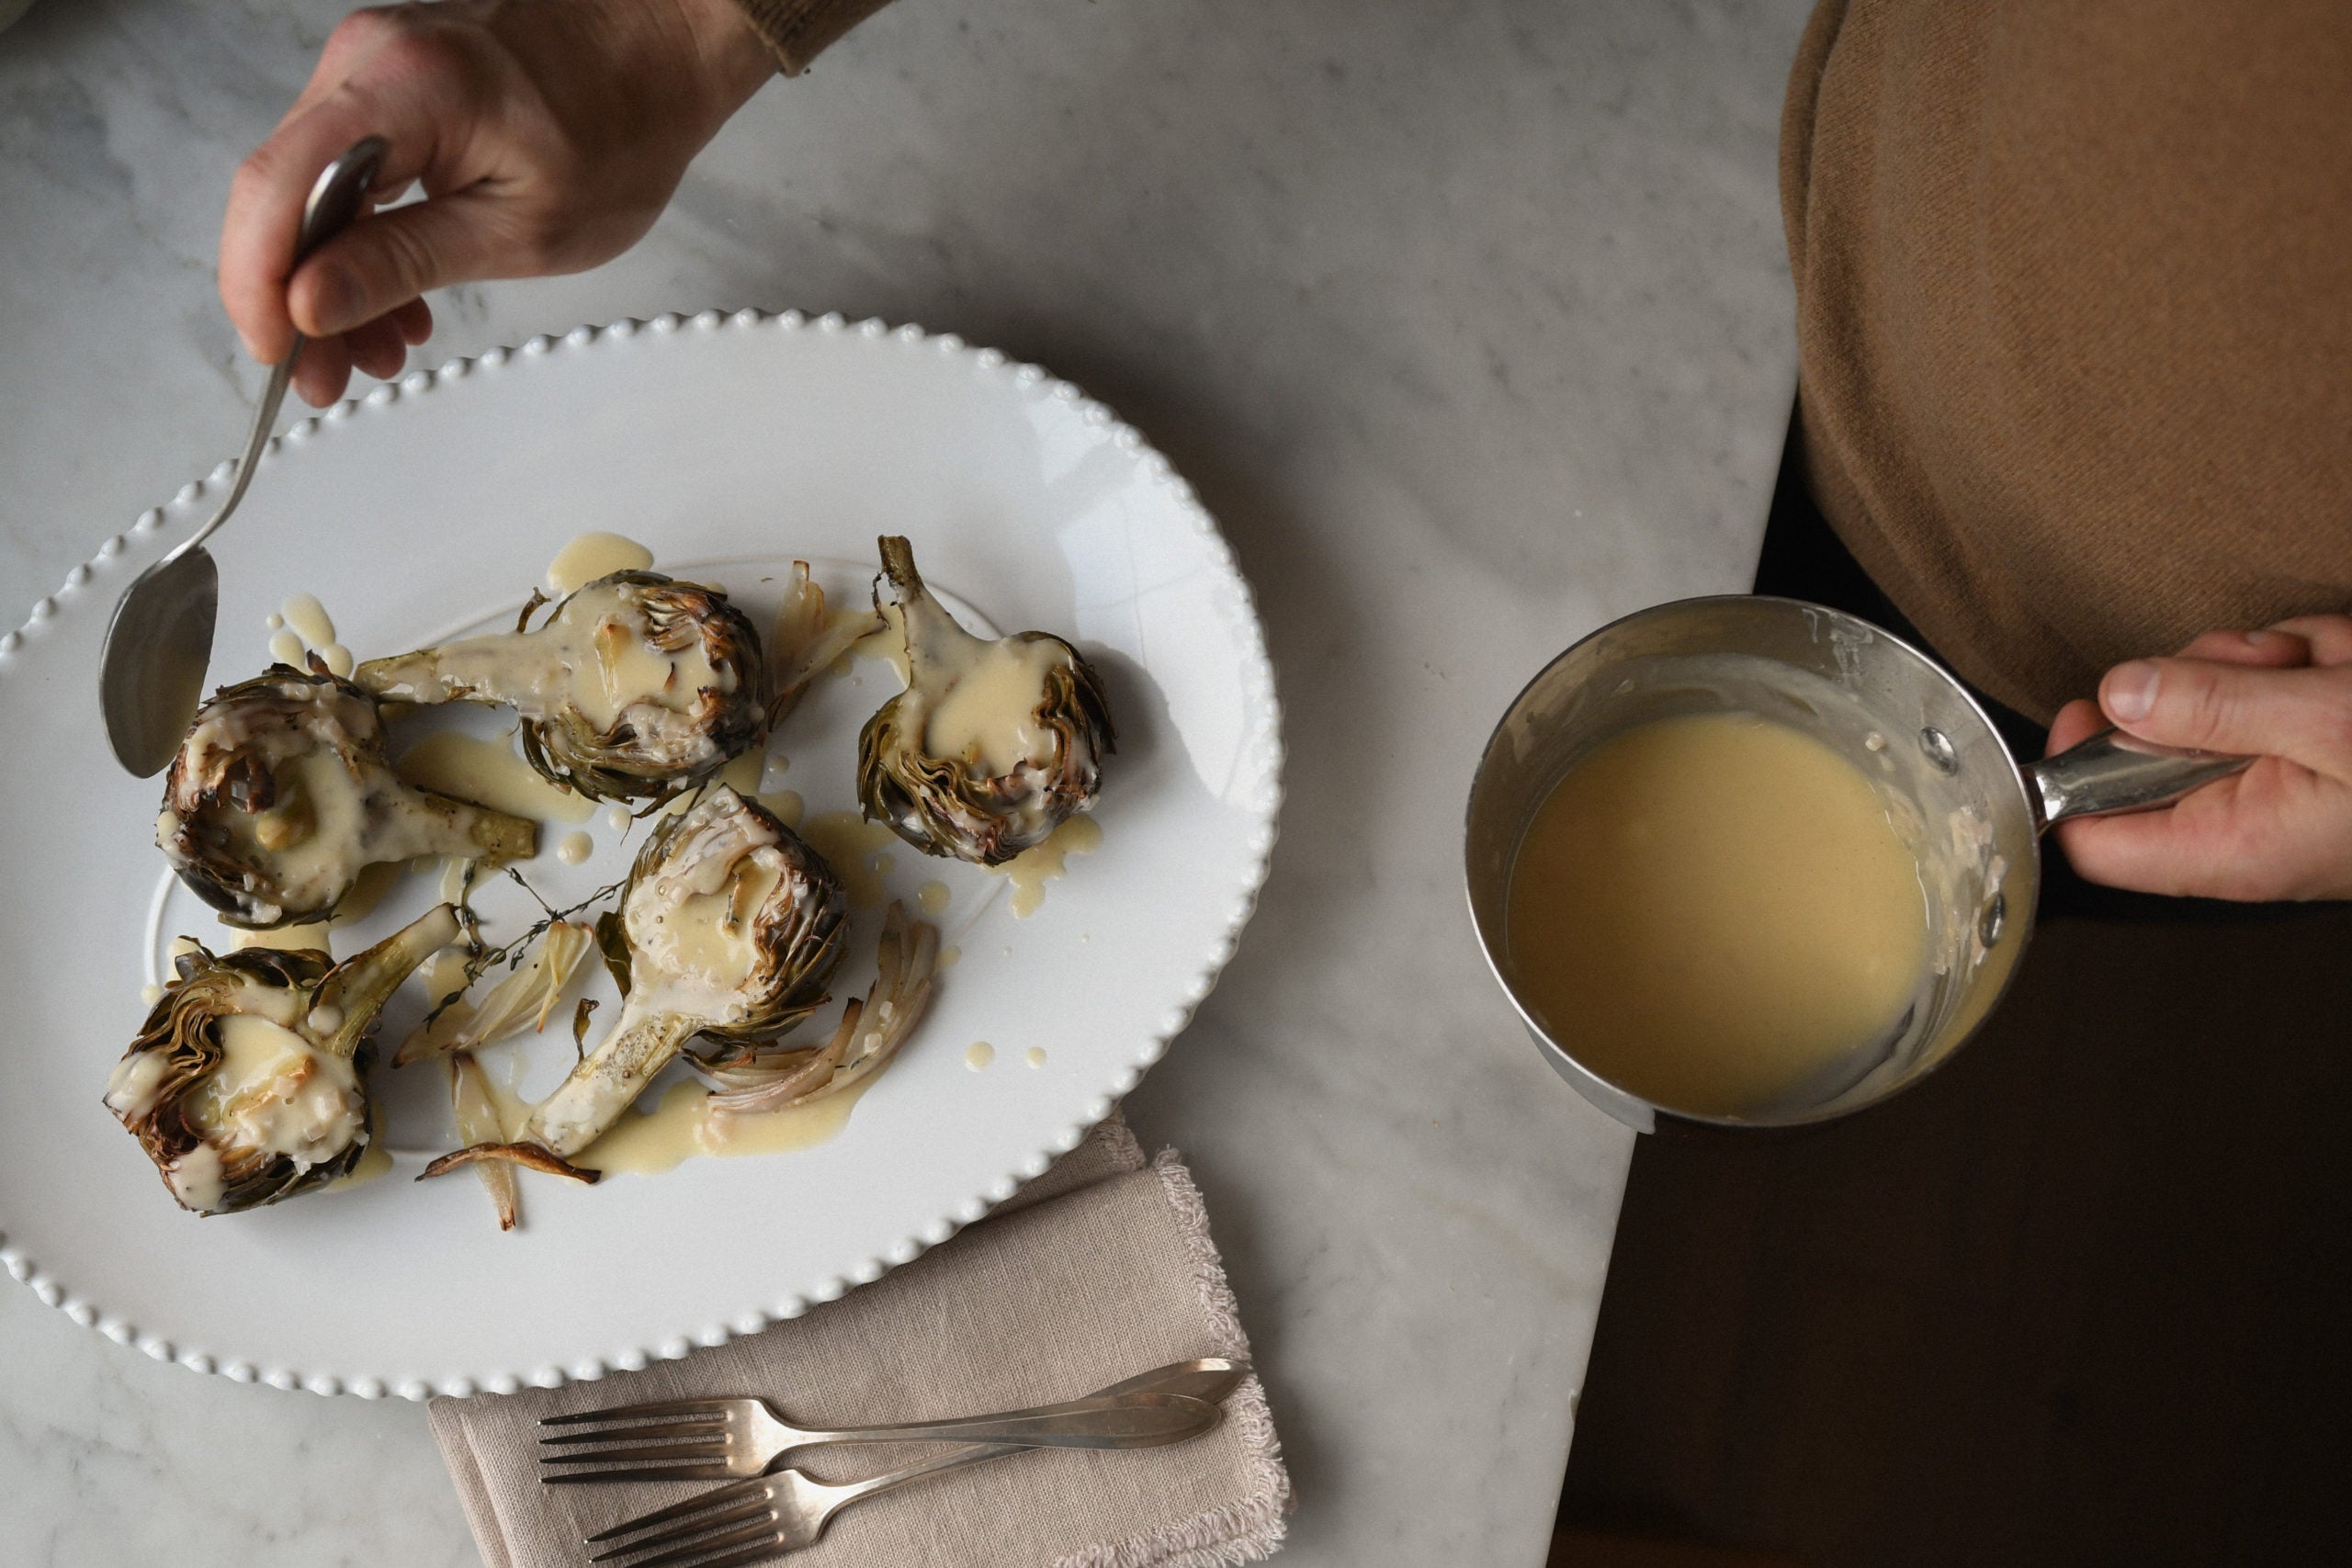 Recipe: Roasted Artichokes with Beurre Blanc